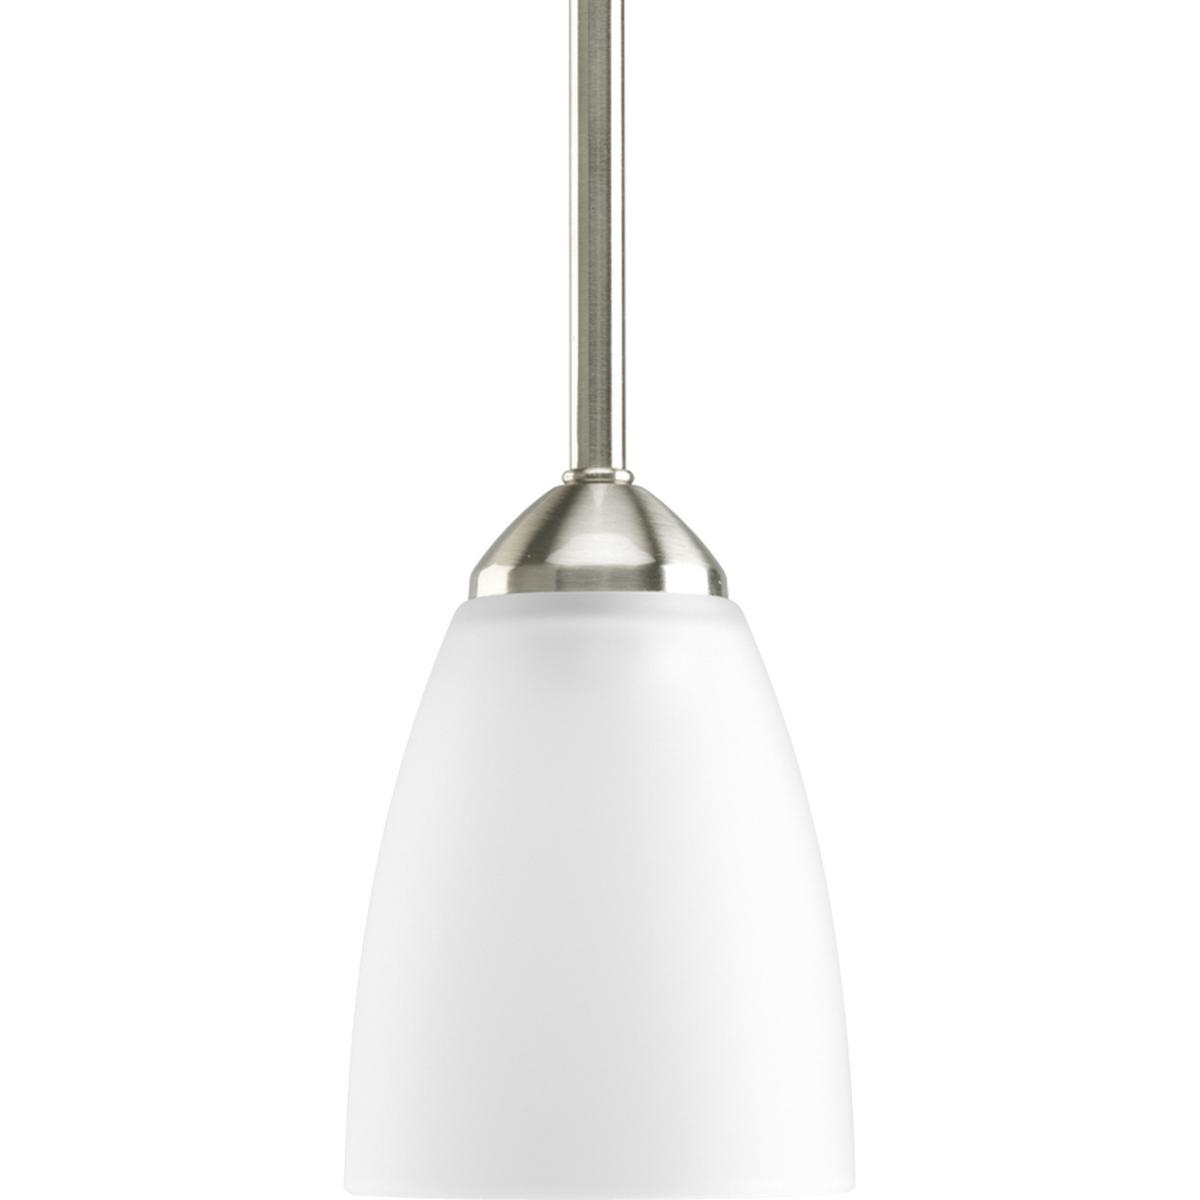 Hubbell P5113-09 Gather possesses a smart simplicity to complement today's home. This one-light mini-pendant contains etched glass shades which add distinction and provide pleasing illumination to your room. Complimented by a Brushed Nickel finish.  ; Brushed Nickel finis